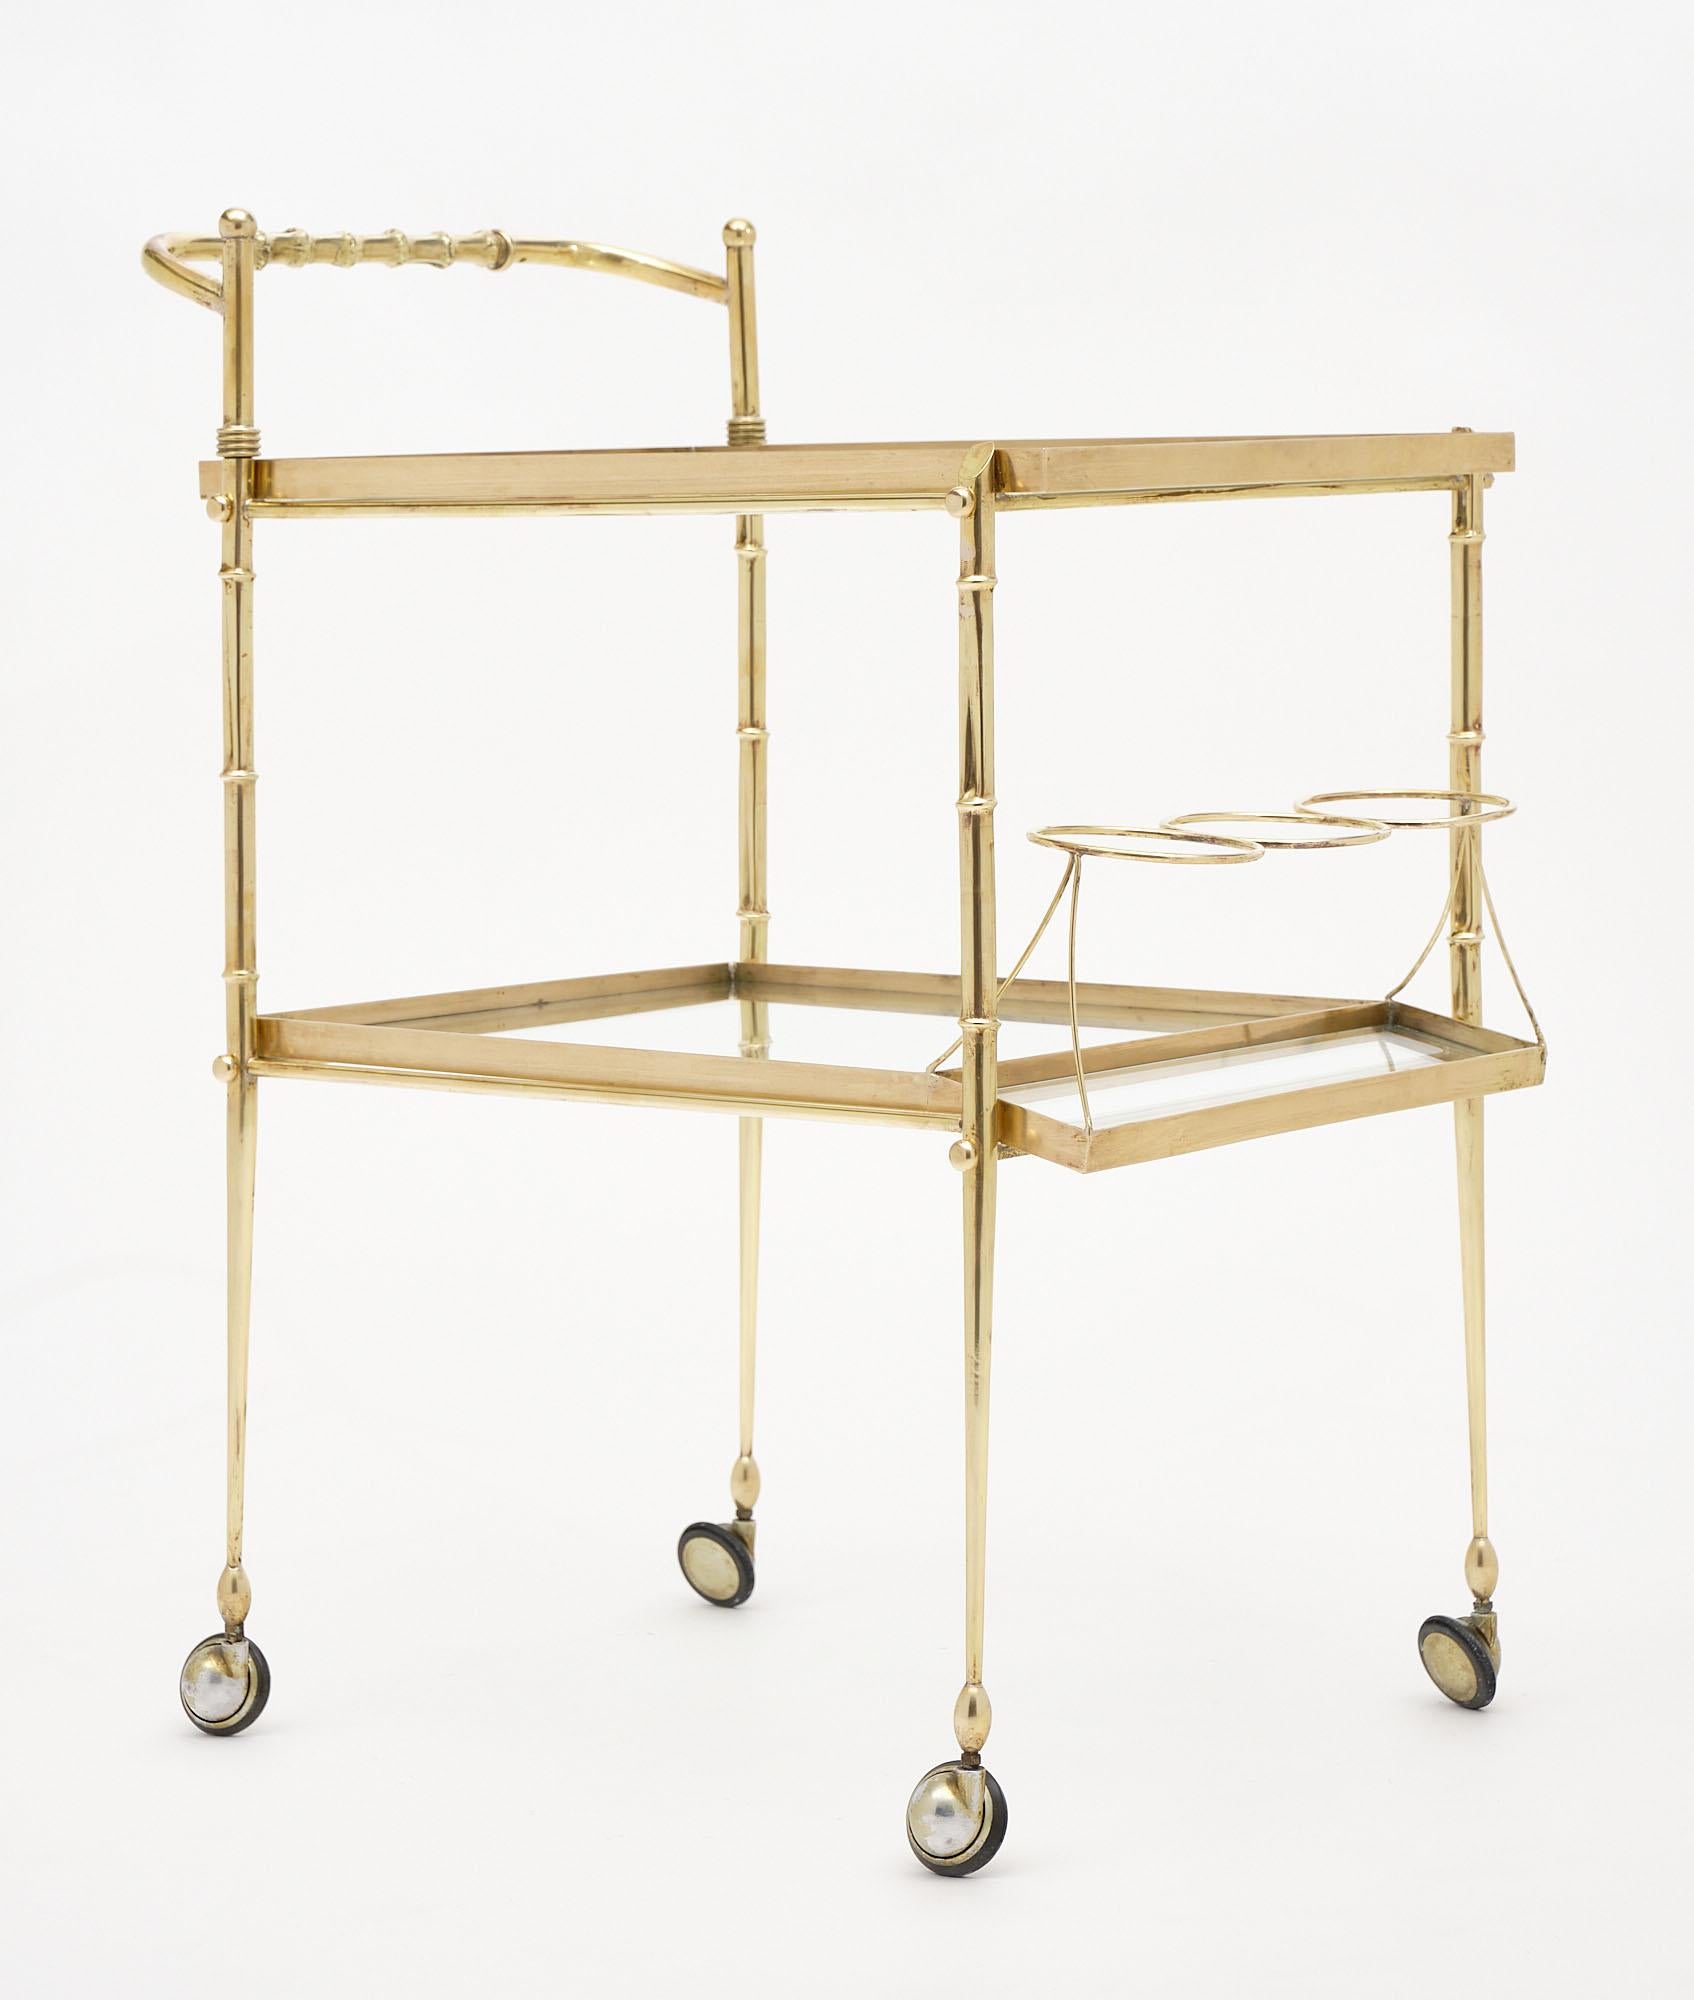 Bar cart from the Art Deco period in Italy made of polished brass. This piece features a bottle holder and two clear glass shelves. It is all original.